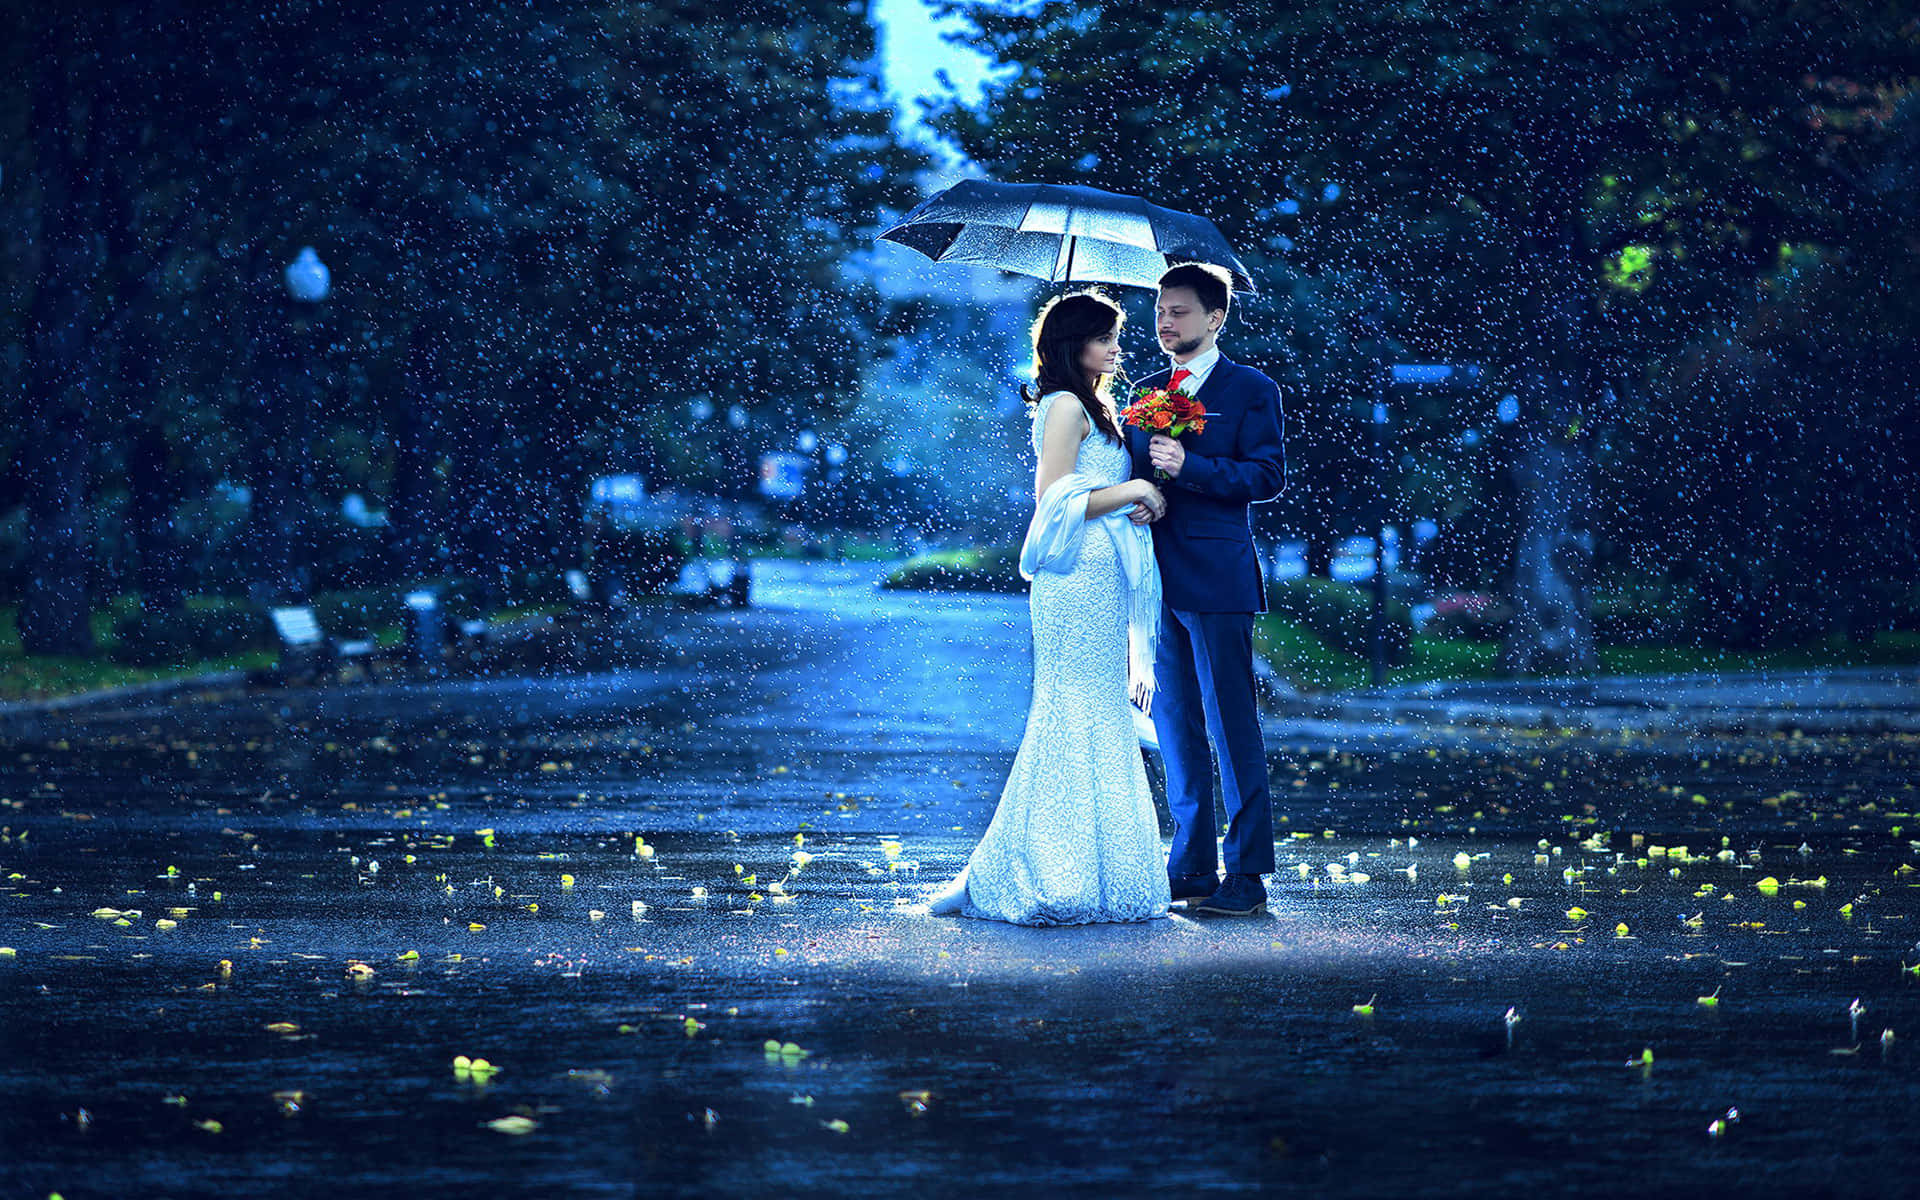 A couple in love, cuddling in the golden rain